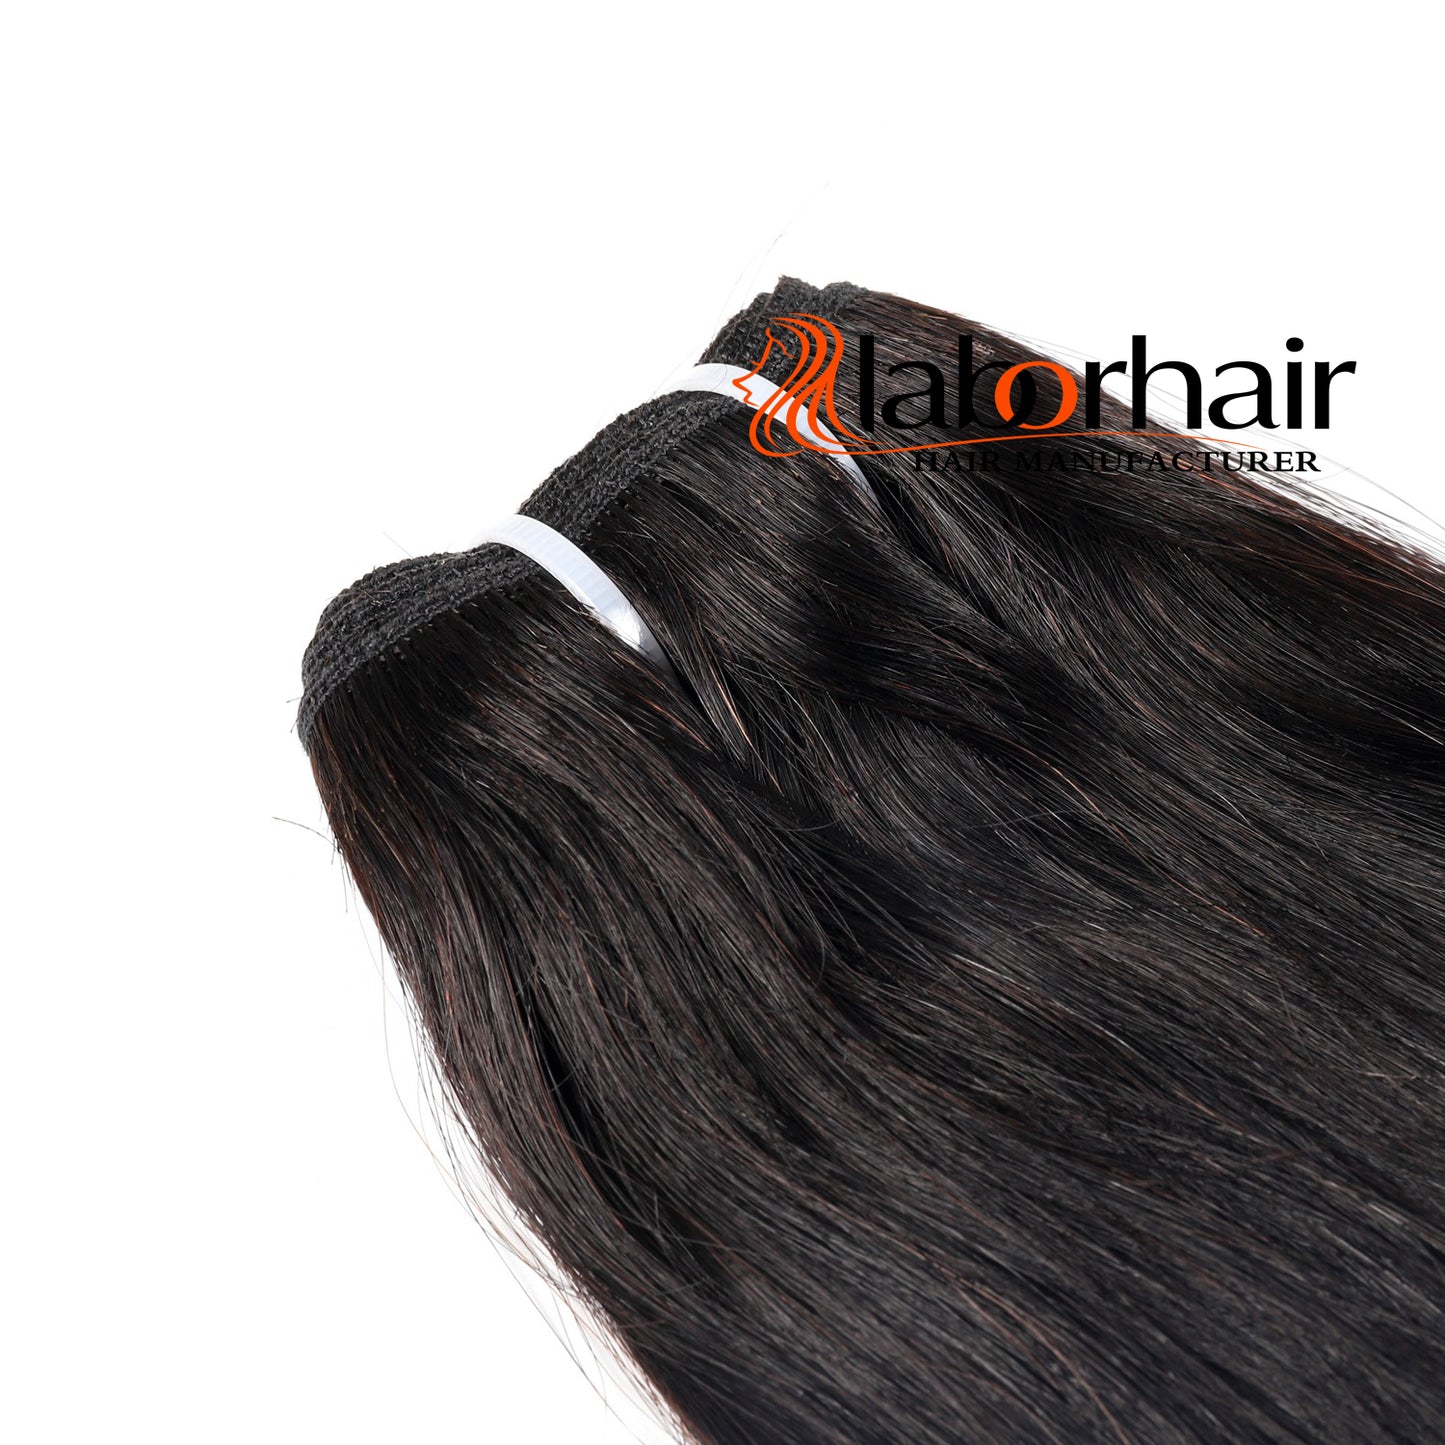 Straight Virgin Human Hair Extensions with 3 Years Life Time